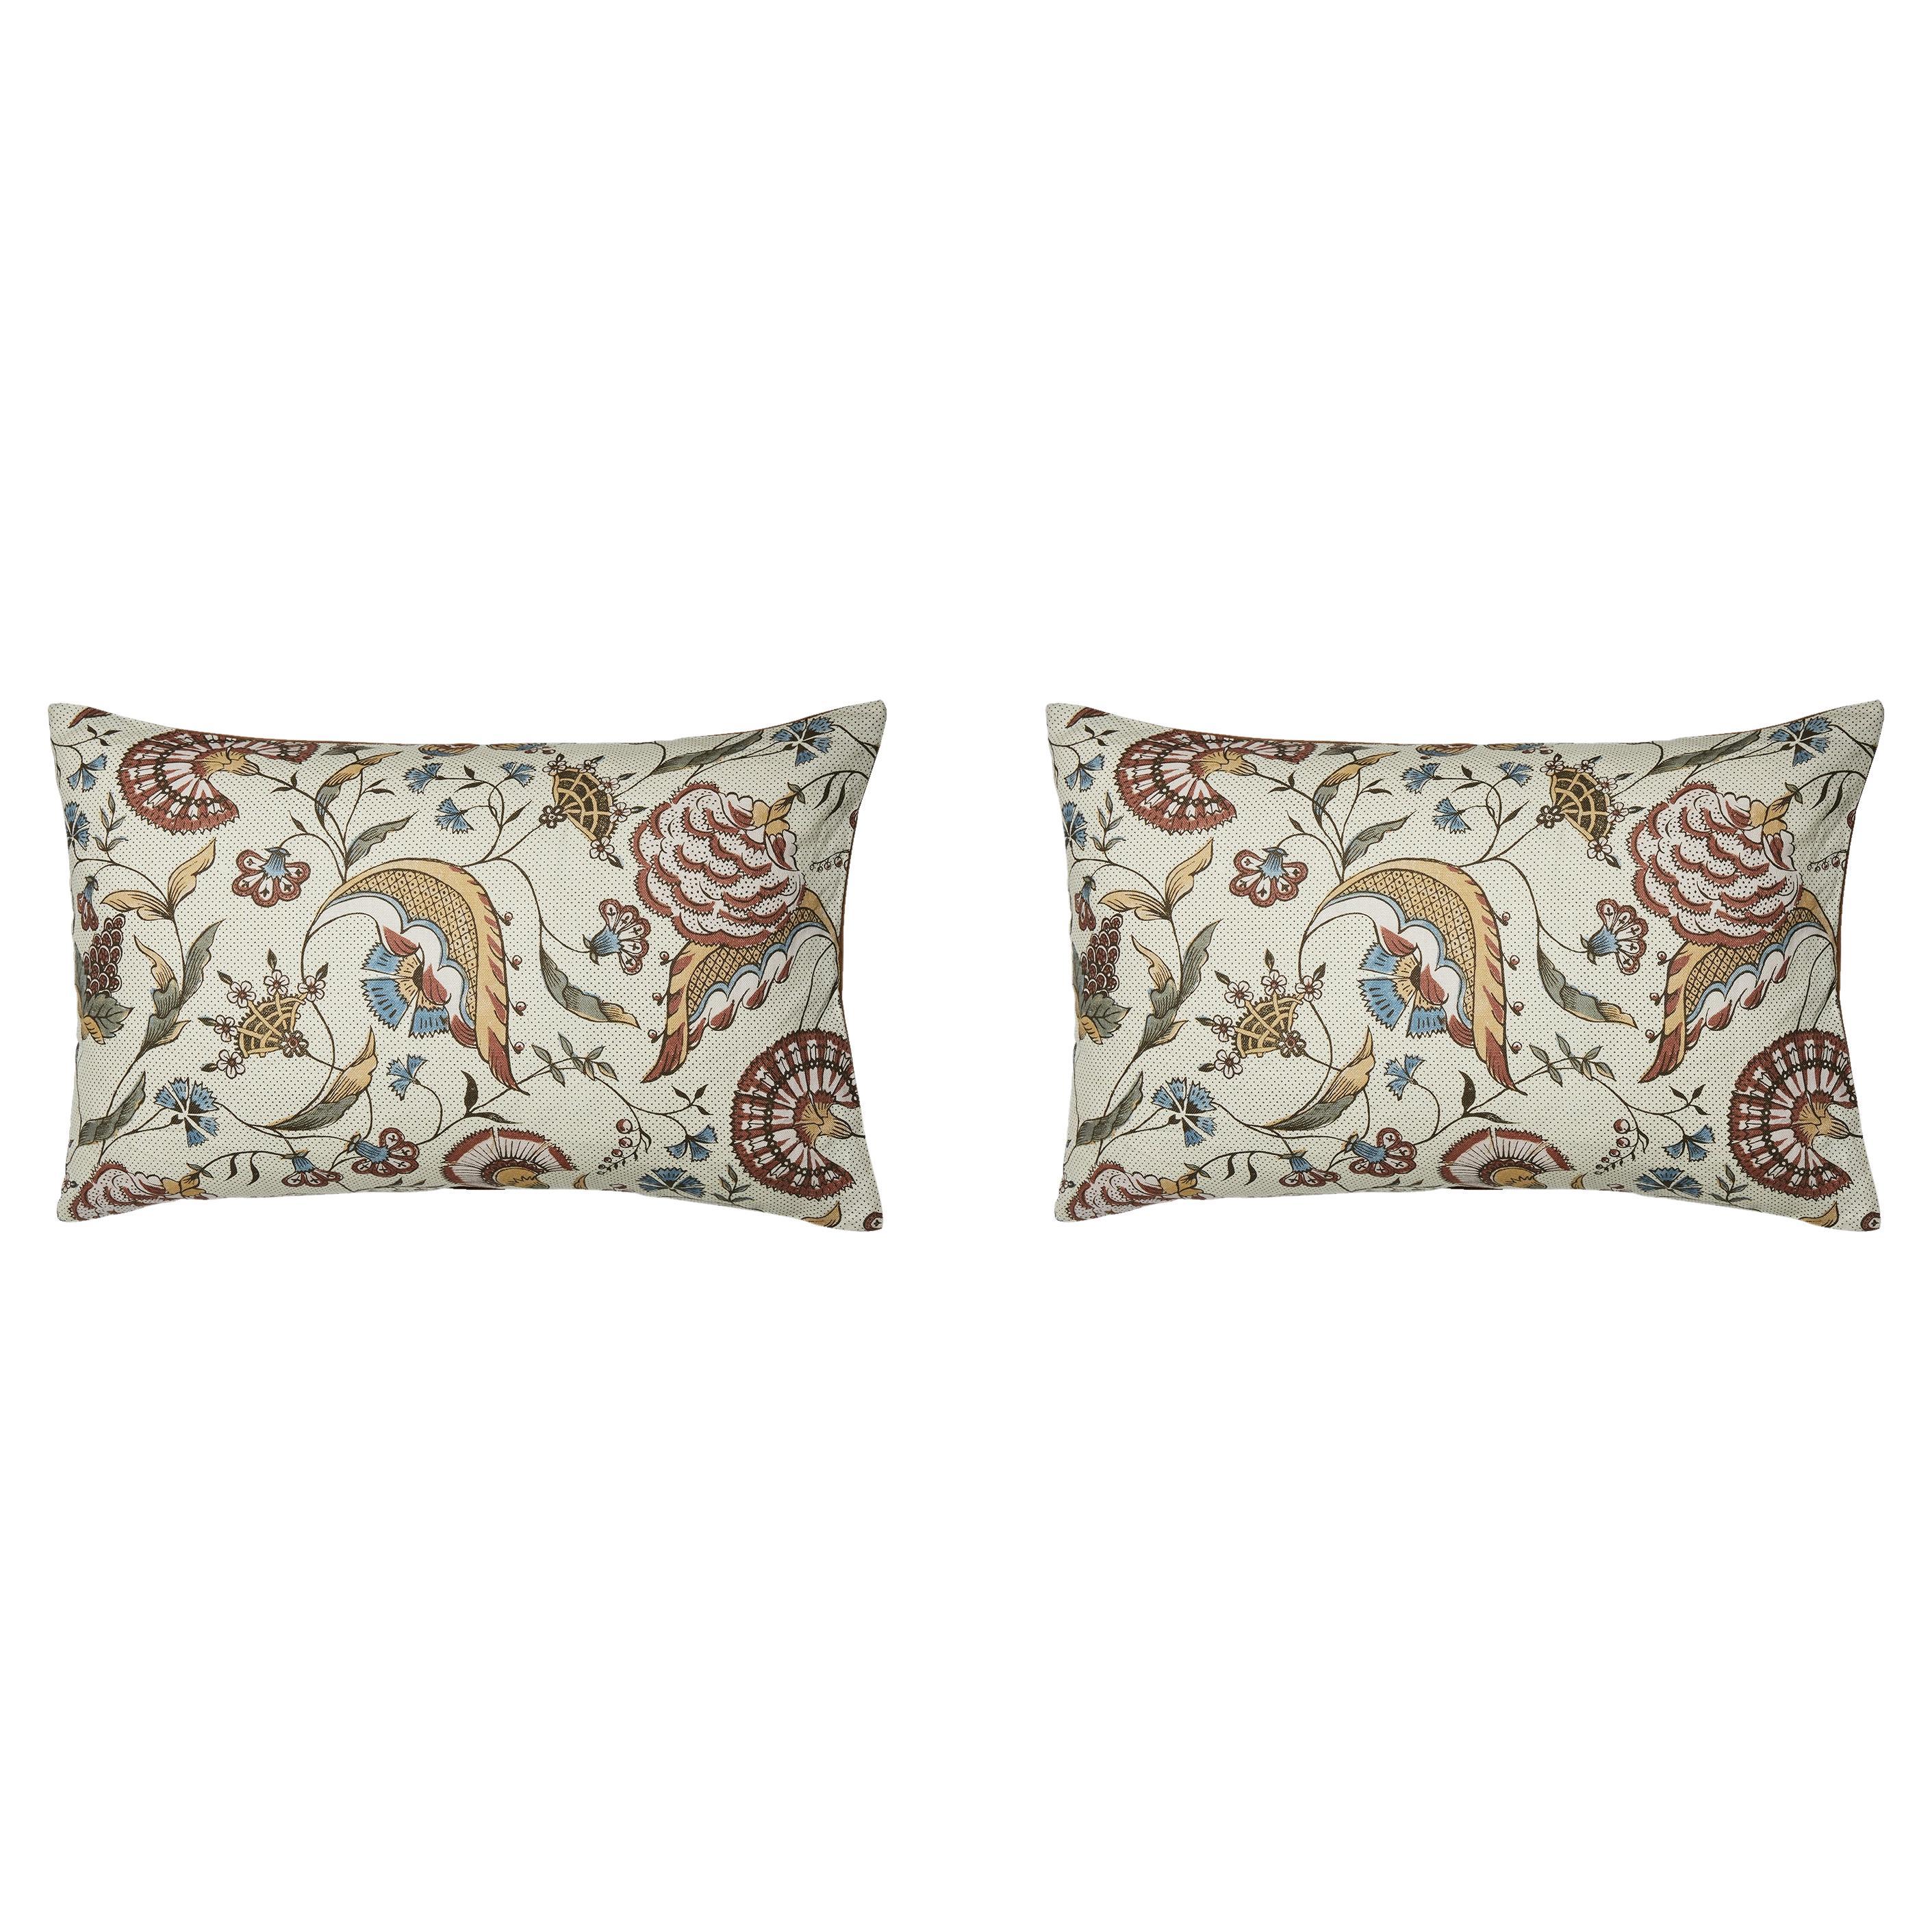 Pair of Linen Pillow Cushions - Jaipur pattern - Designed and Made in Paris For Sale